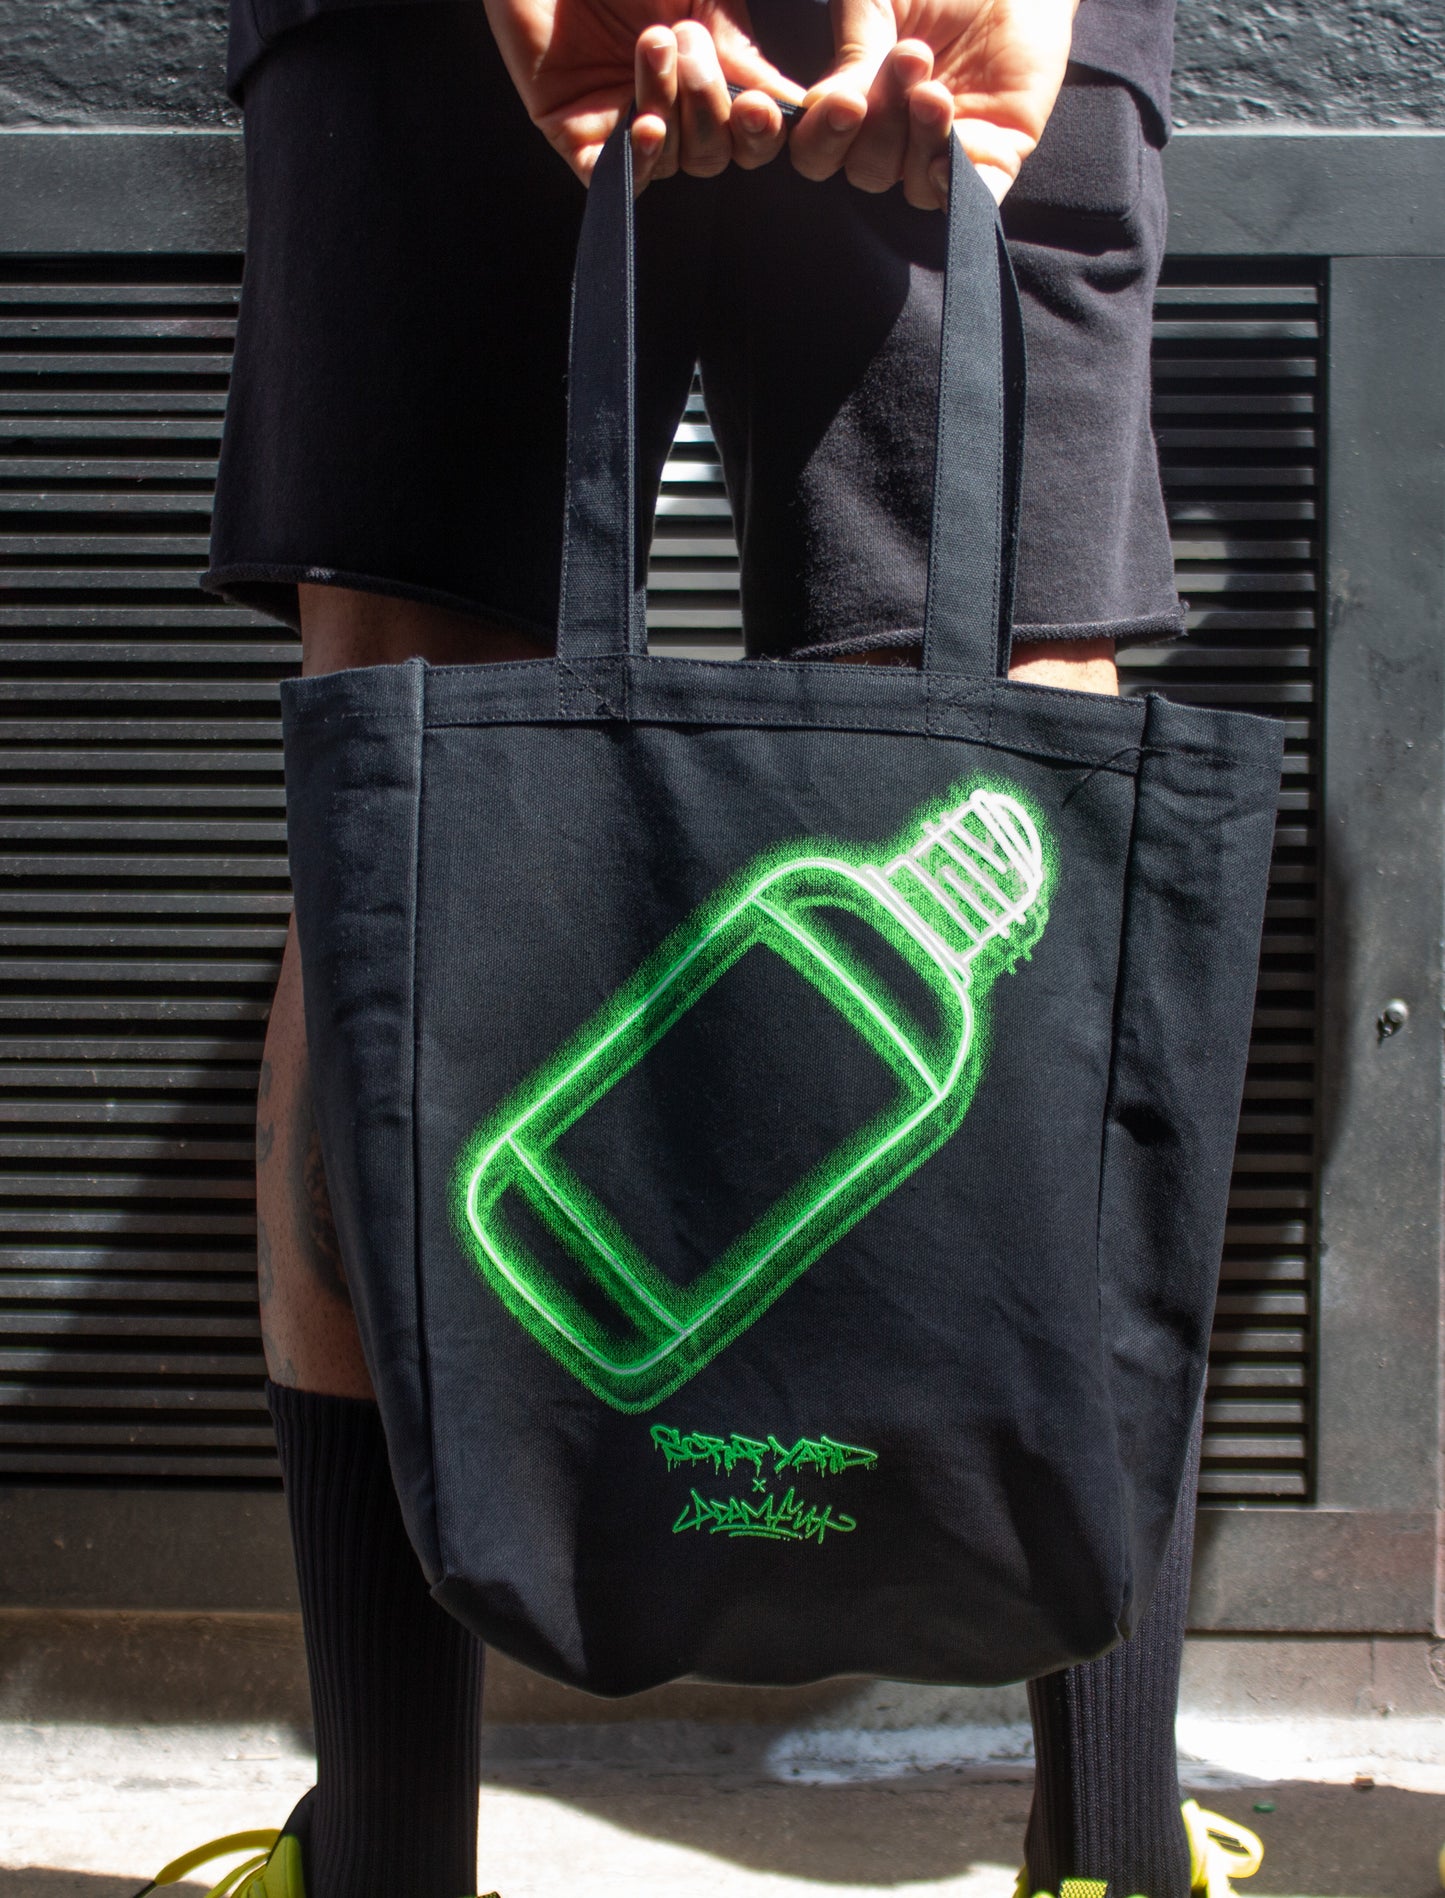 NEON GREEN MOP TOTE